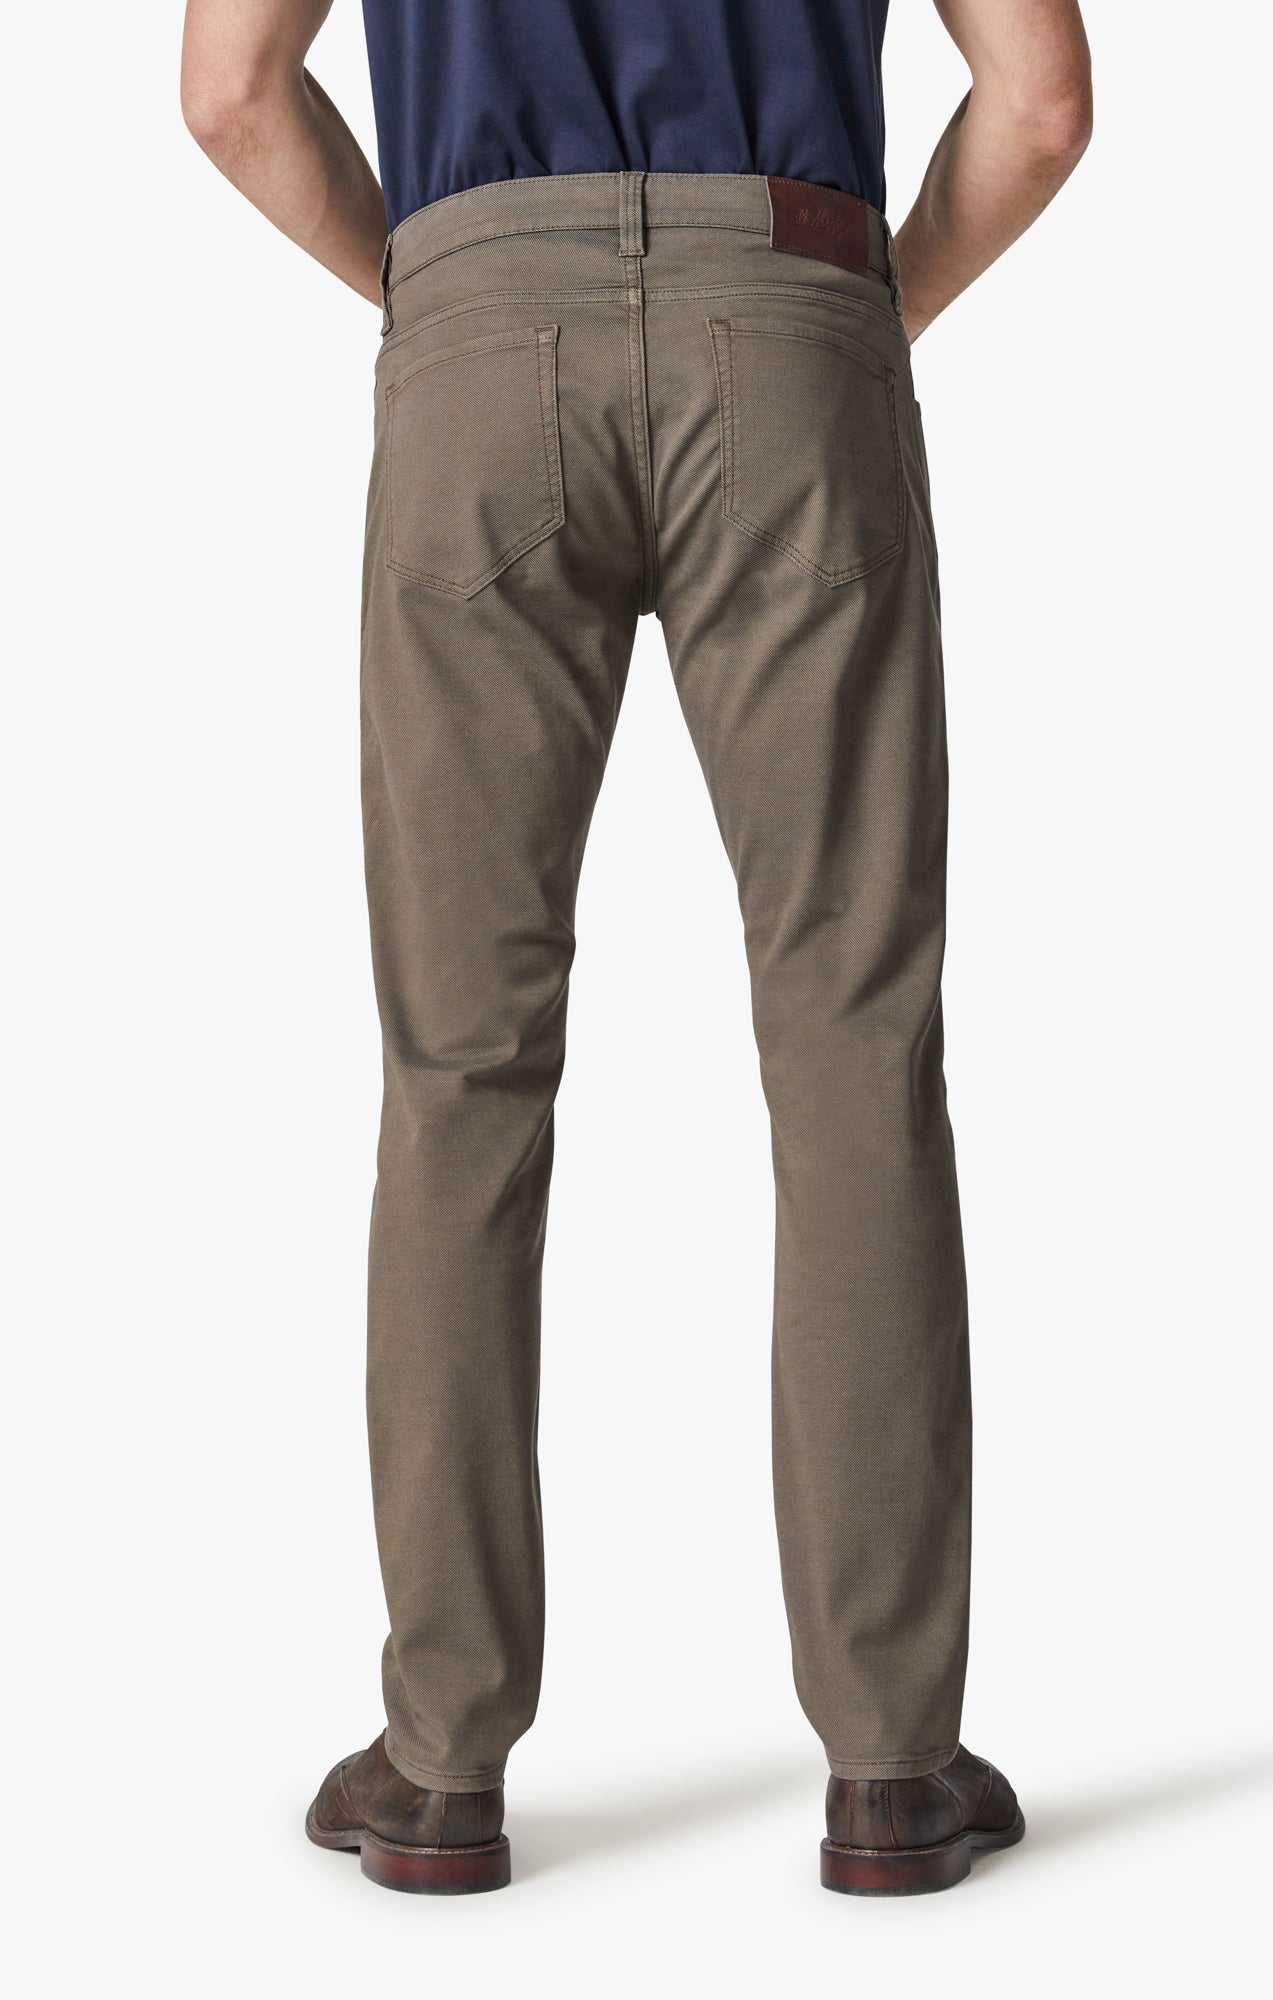 Courage Straight Leg Pants in Canteen Coolmax Image 4